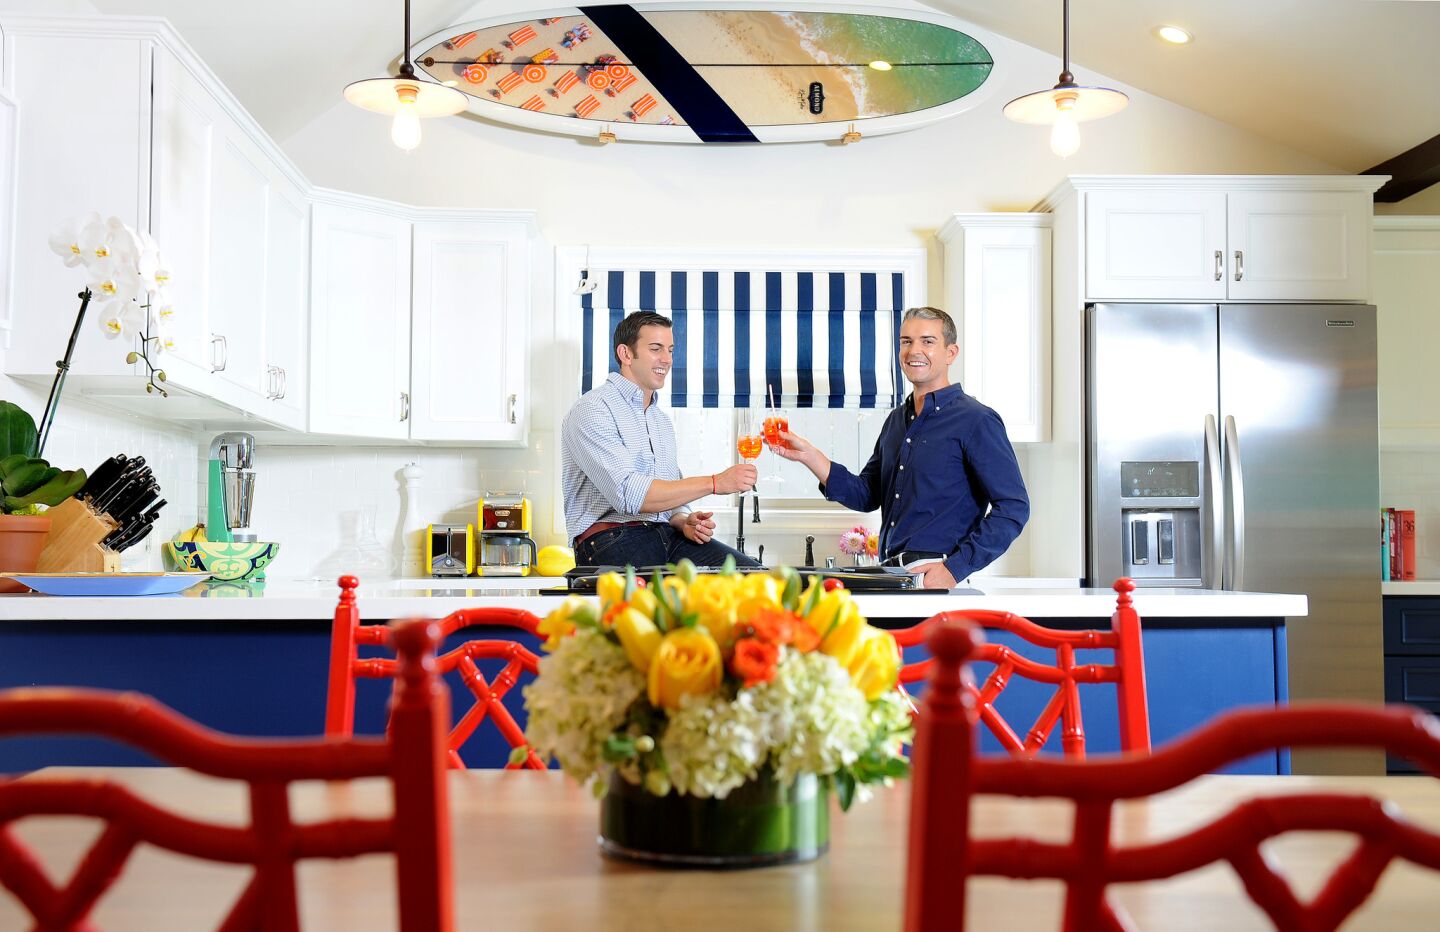 Jeff Richardson, left, and photographer husband Gray Malin share a toast in their kitchen. This part of the house has a preppy, nautical vibe, with white tile and navy blue cabinetry. The 1960s dining chairs, painted cherry red, feel almost Chinese.